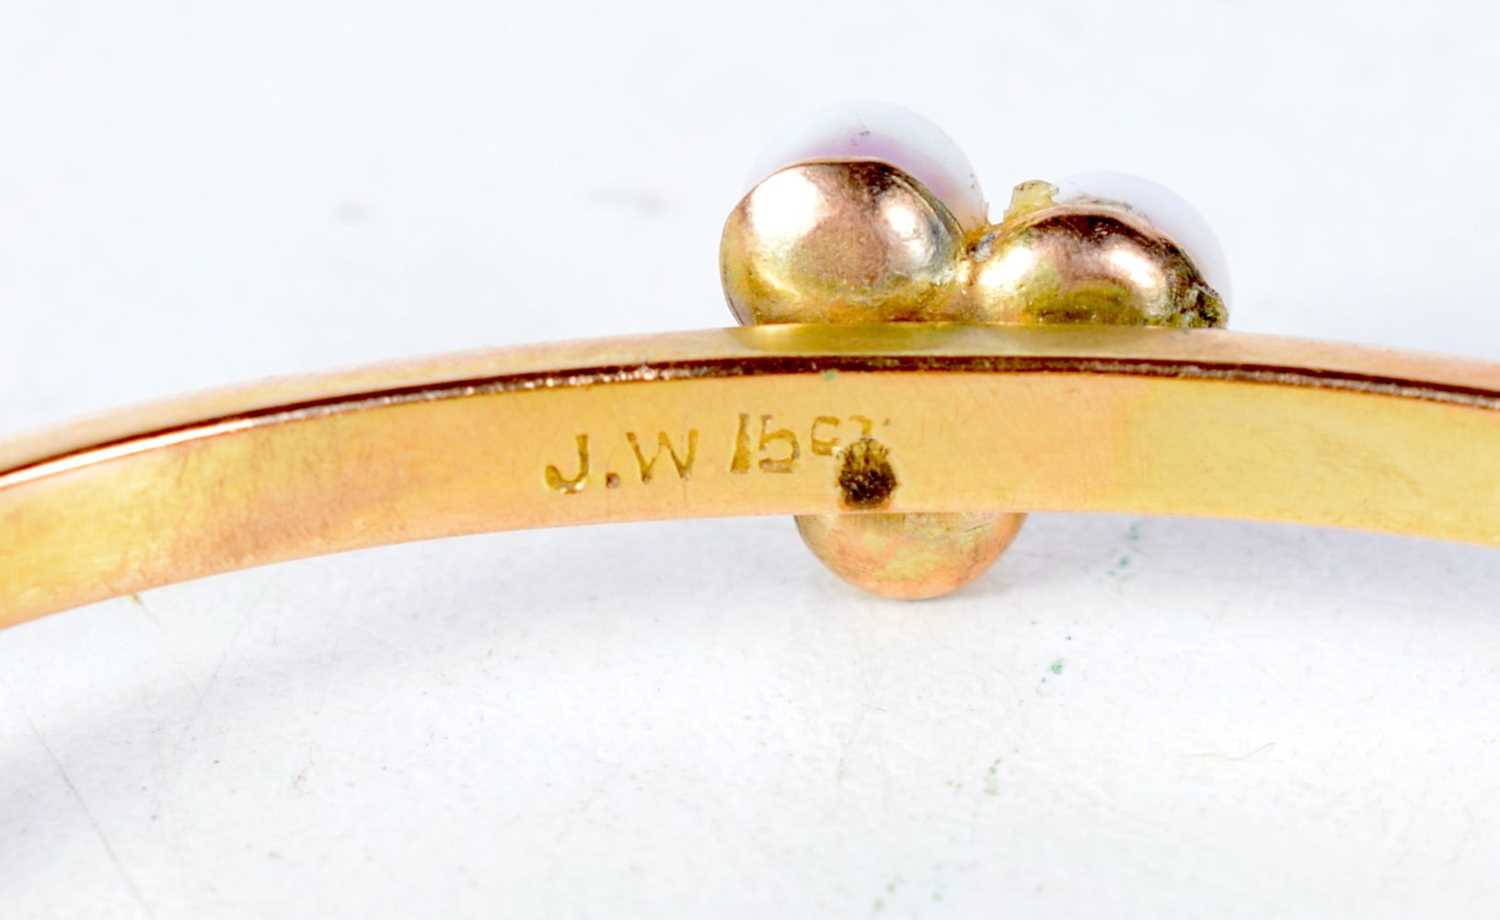 An Antique 15 Carat Gold Bangle set with 3 Pearls. Stamped 15CT, 4.8 cm x 5.7cm, weight 6.6g - Image 2 of 3